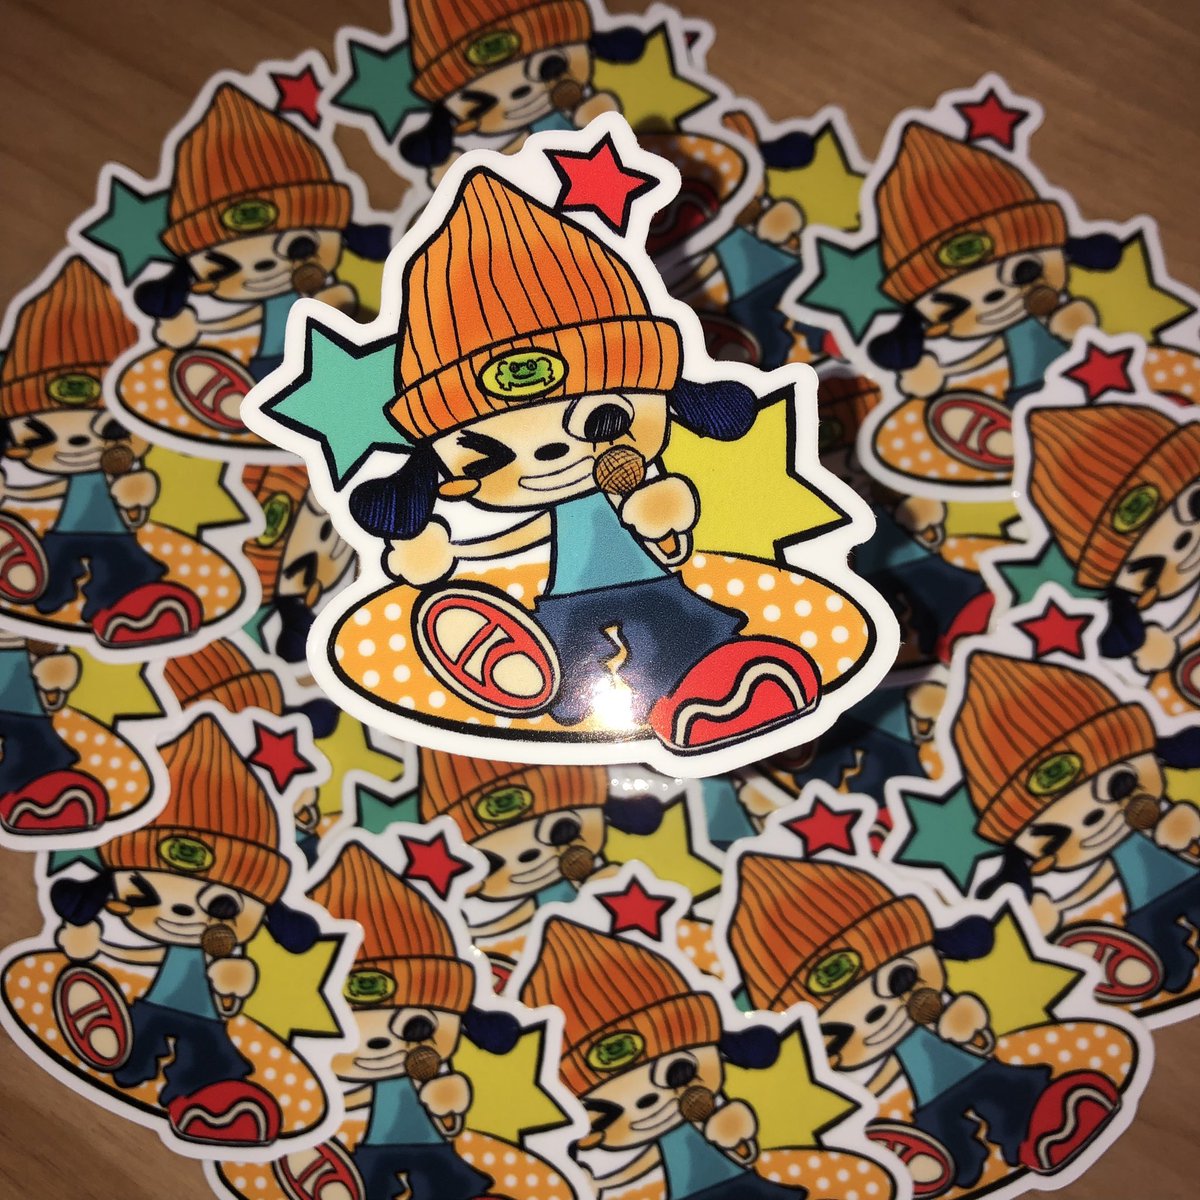 Made some Parappa stickers, I love this little guy #parappatherapper